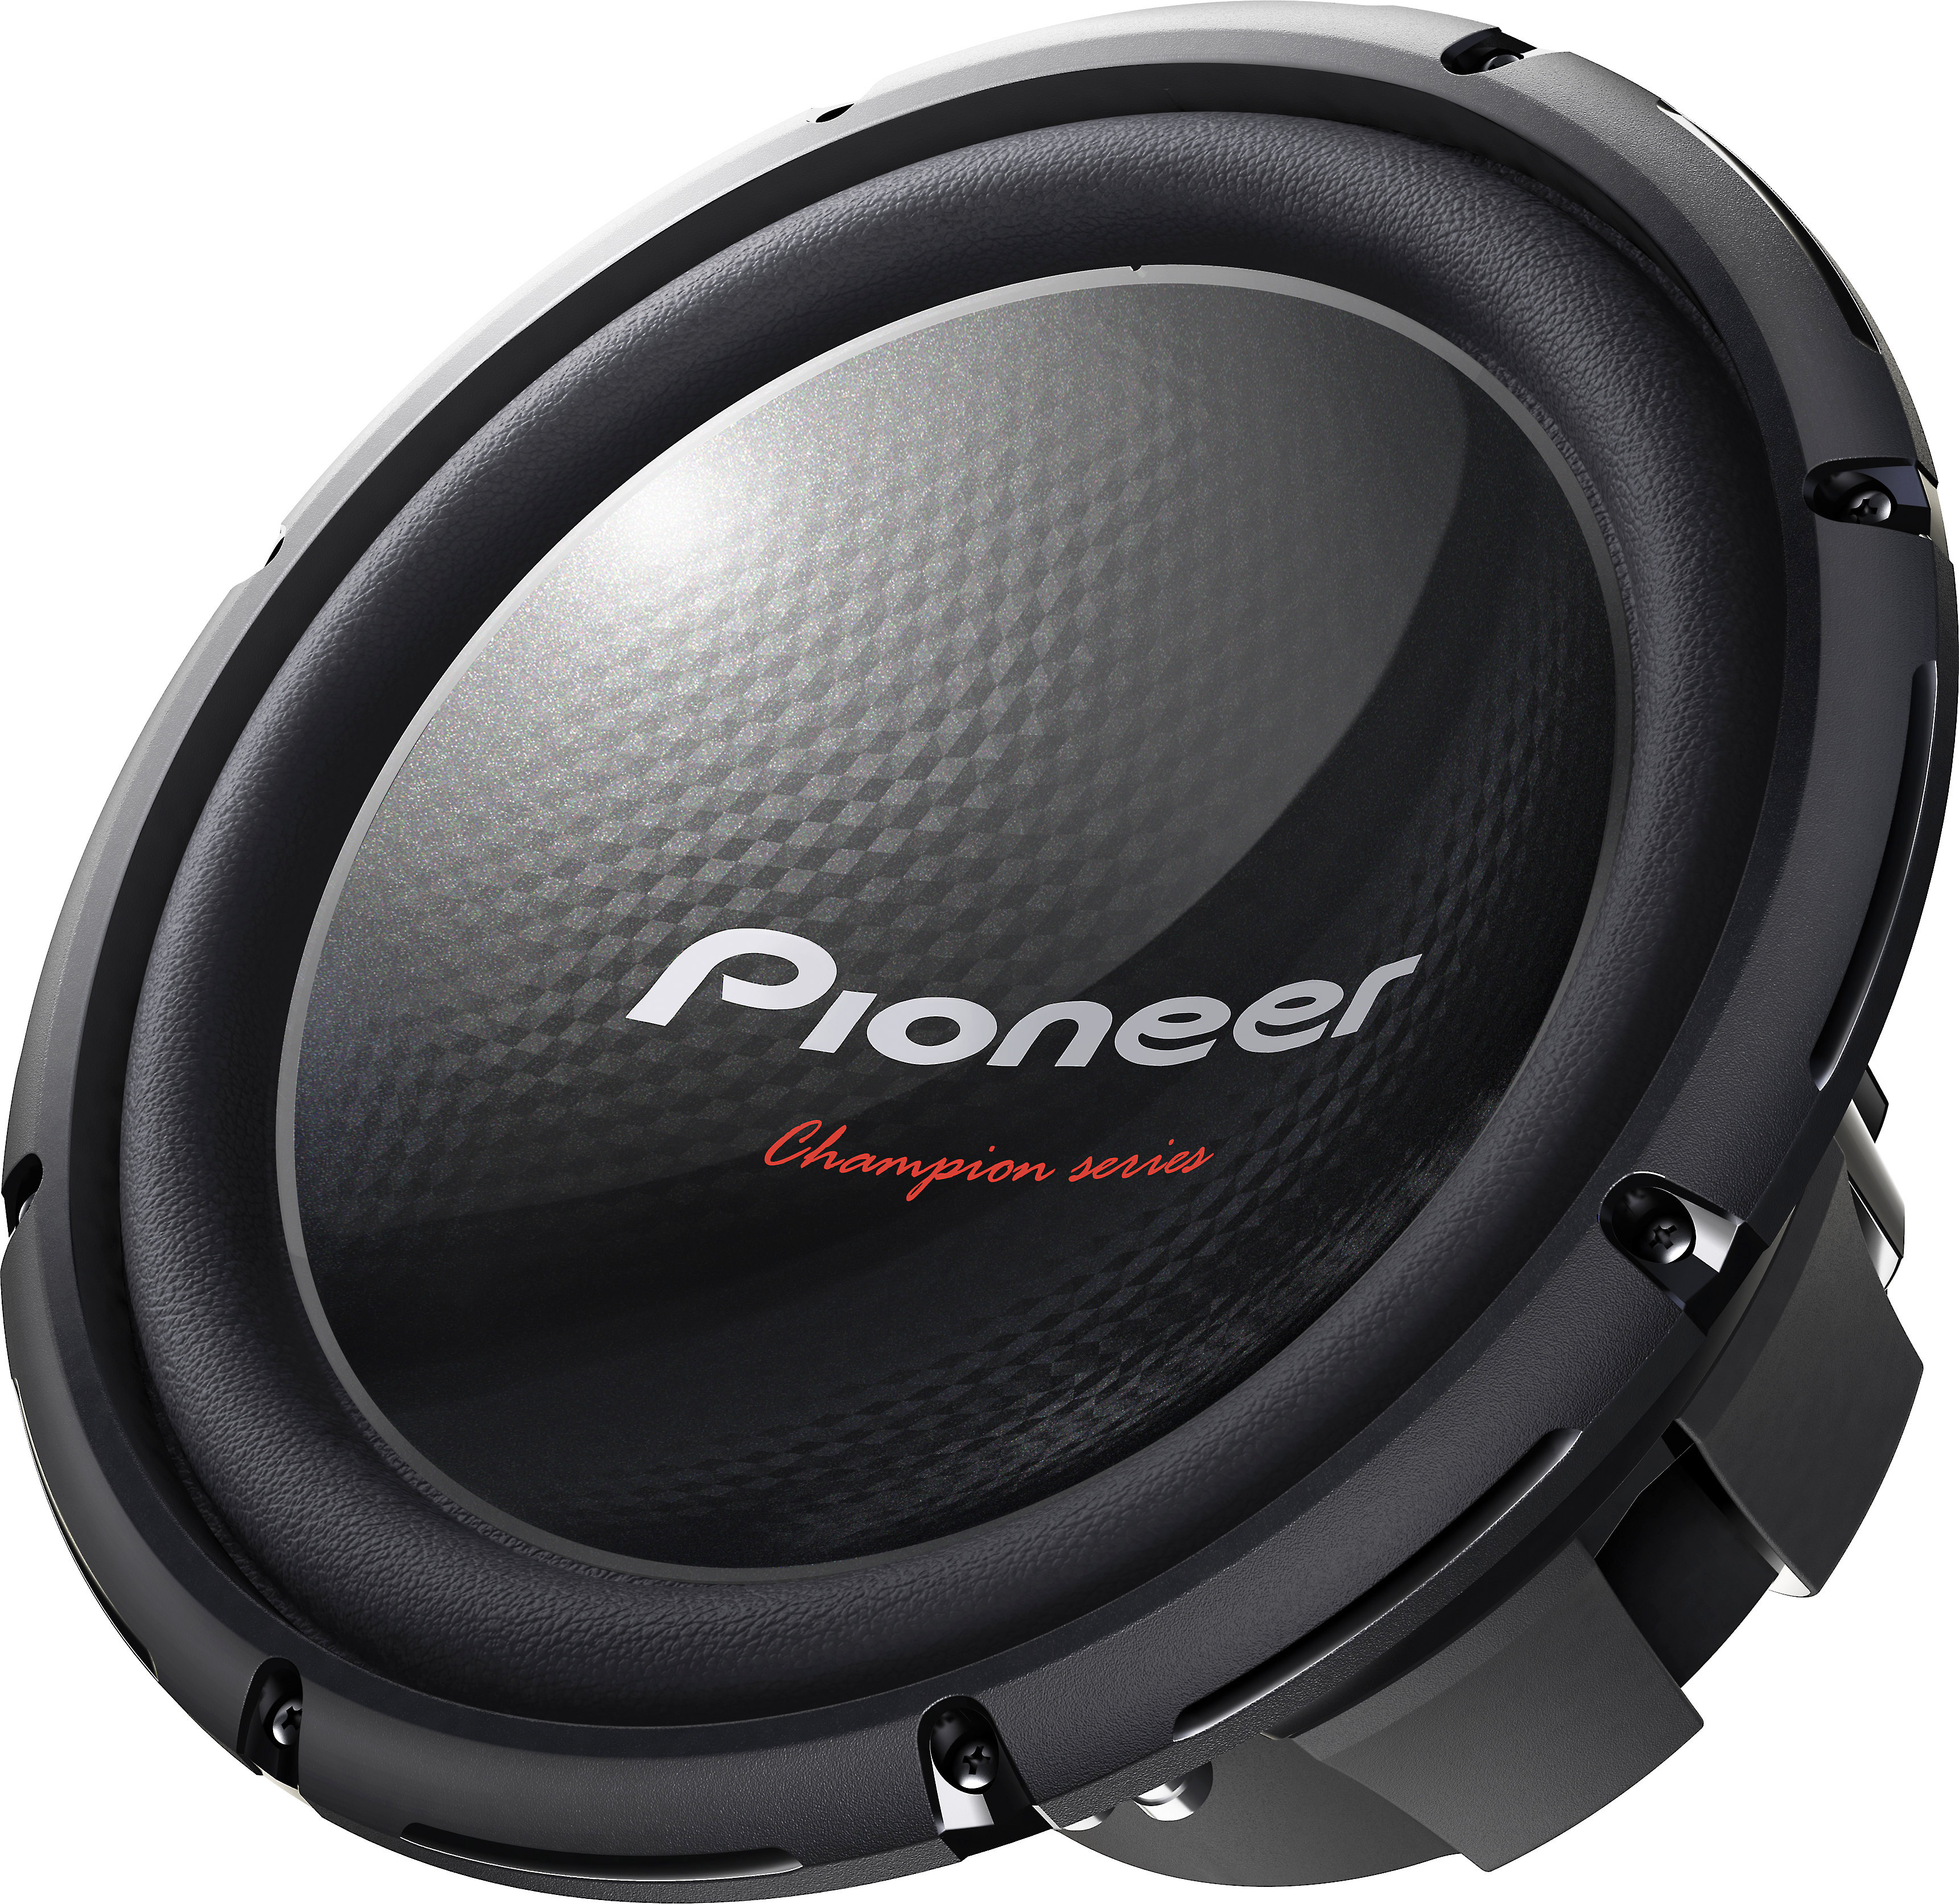 Pioneer TS-W310D4 Champion Series 12" subwoofer with dual 4-ohm voice coils at Crutchfield